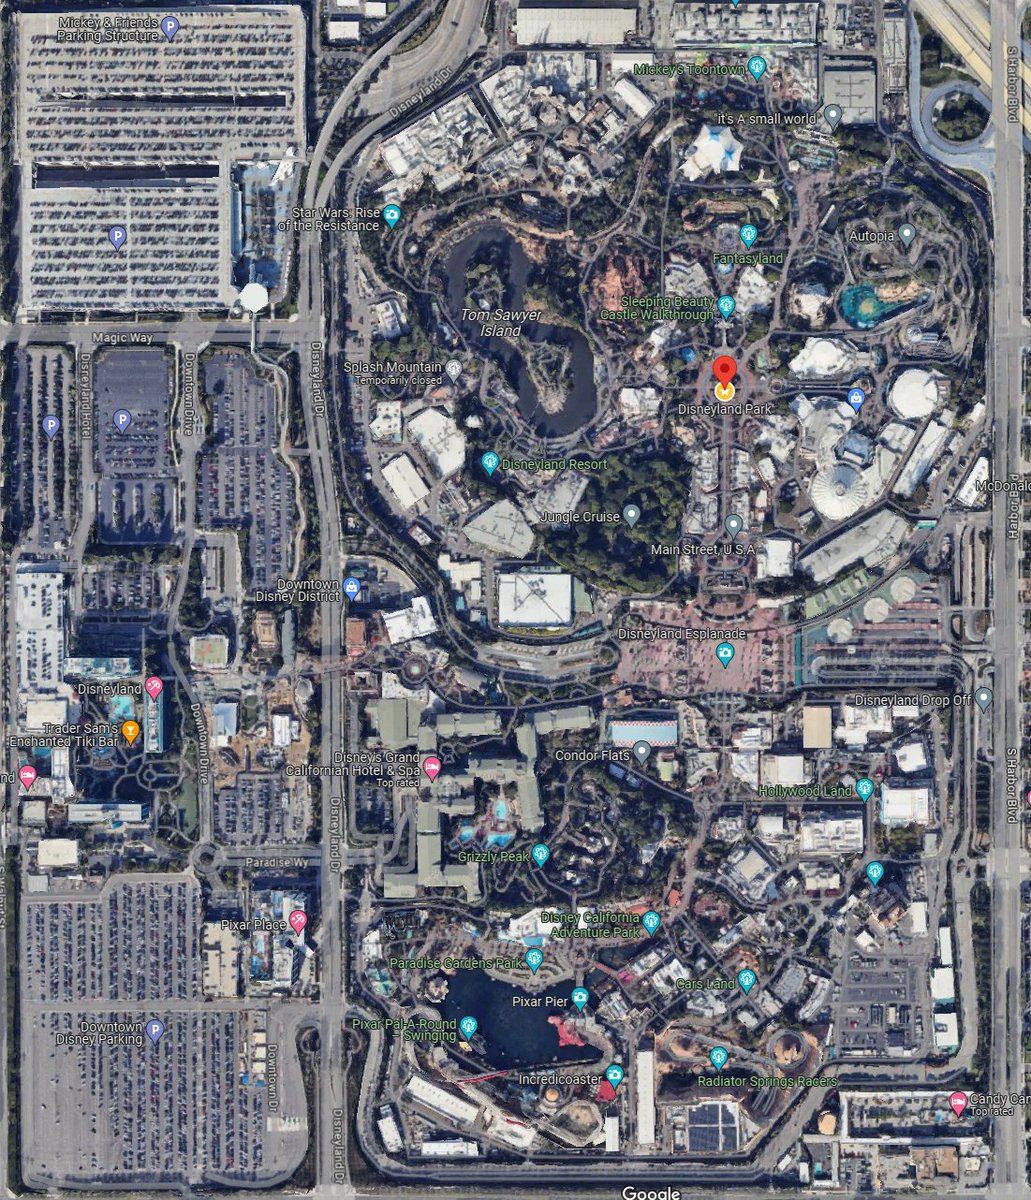 The Disneyland Resort has been fully updated with new 3D imagery on Google Maps! The timestamp for this update is approximately December 2023. Let's take a look at what's changed!